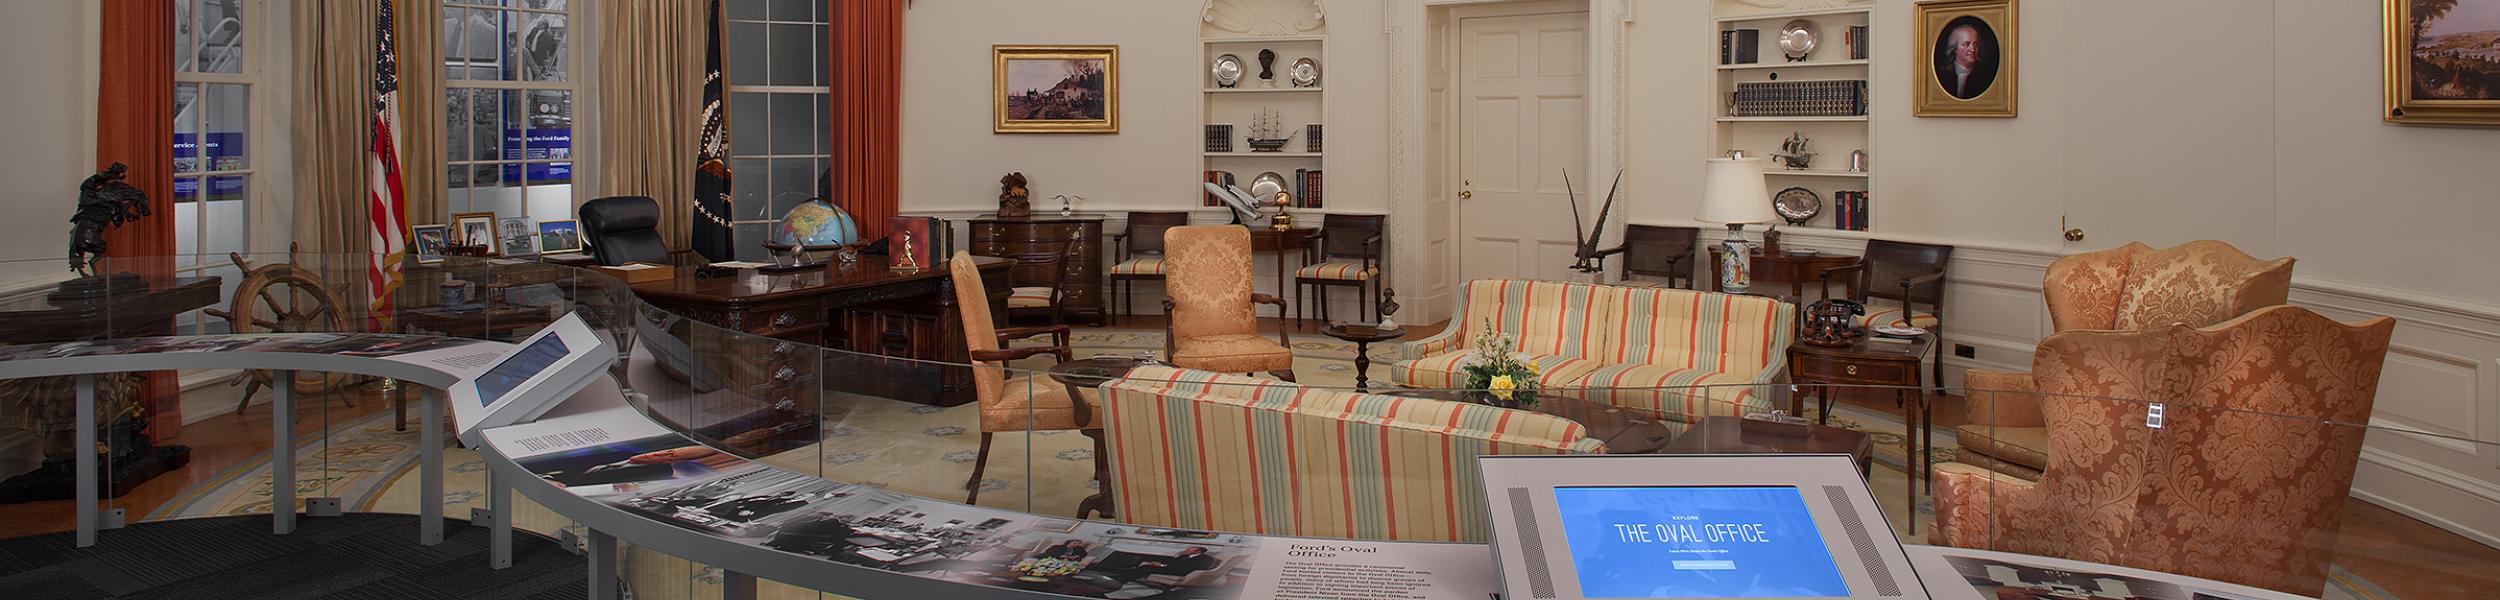 A look into the Oval Office exhibit at the museum showcasing the desk, chairs, sofas and tables arranged as they were in the White House.